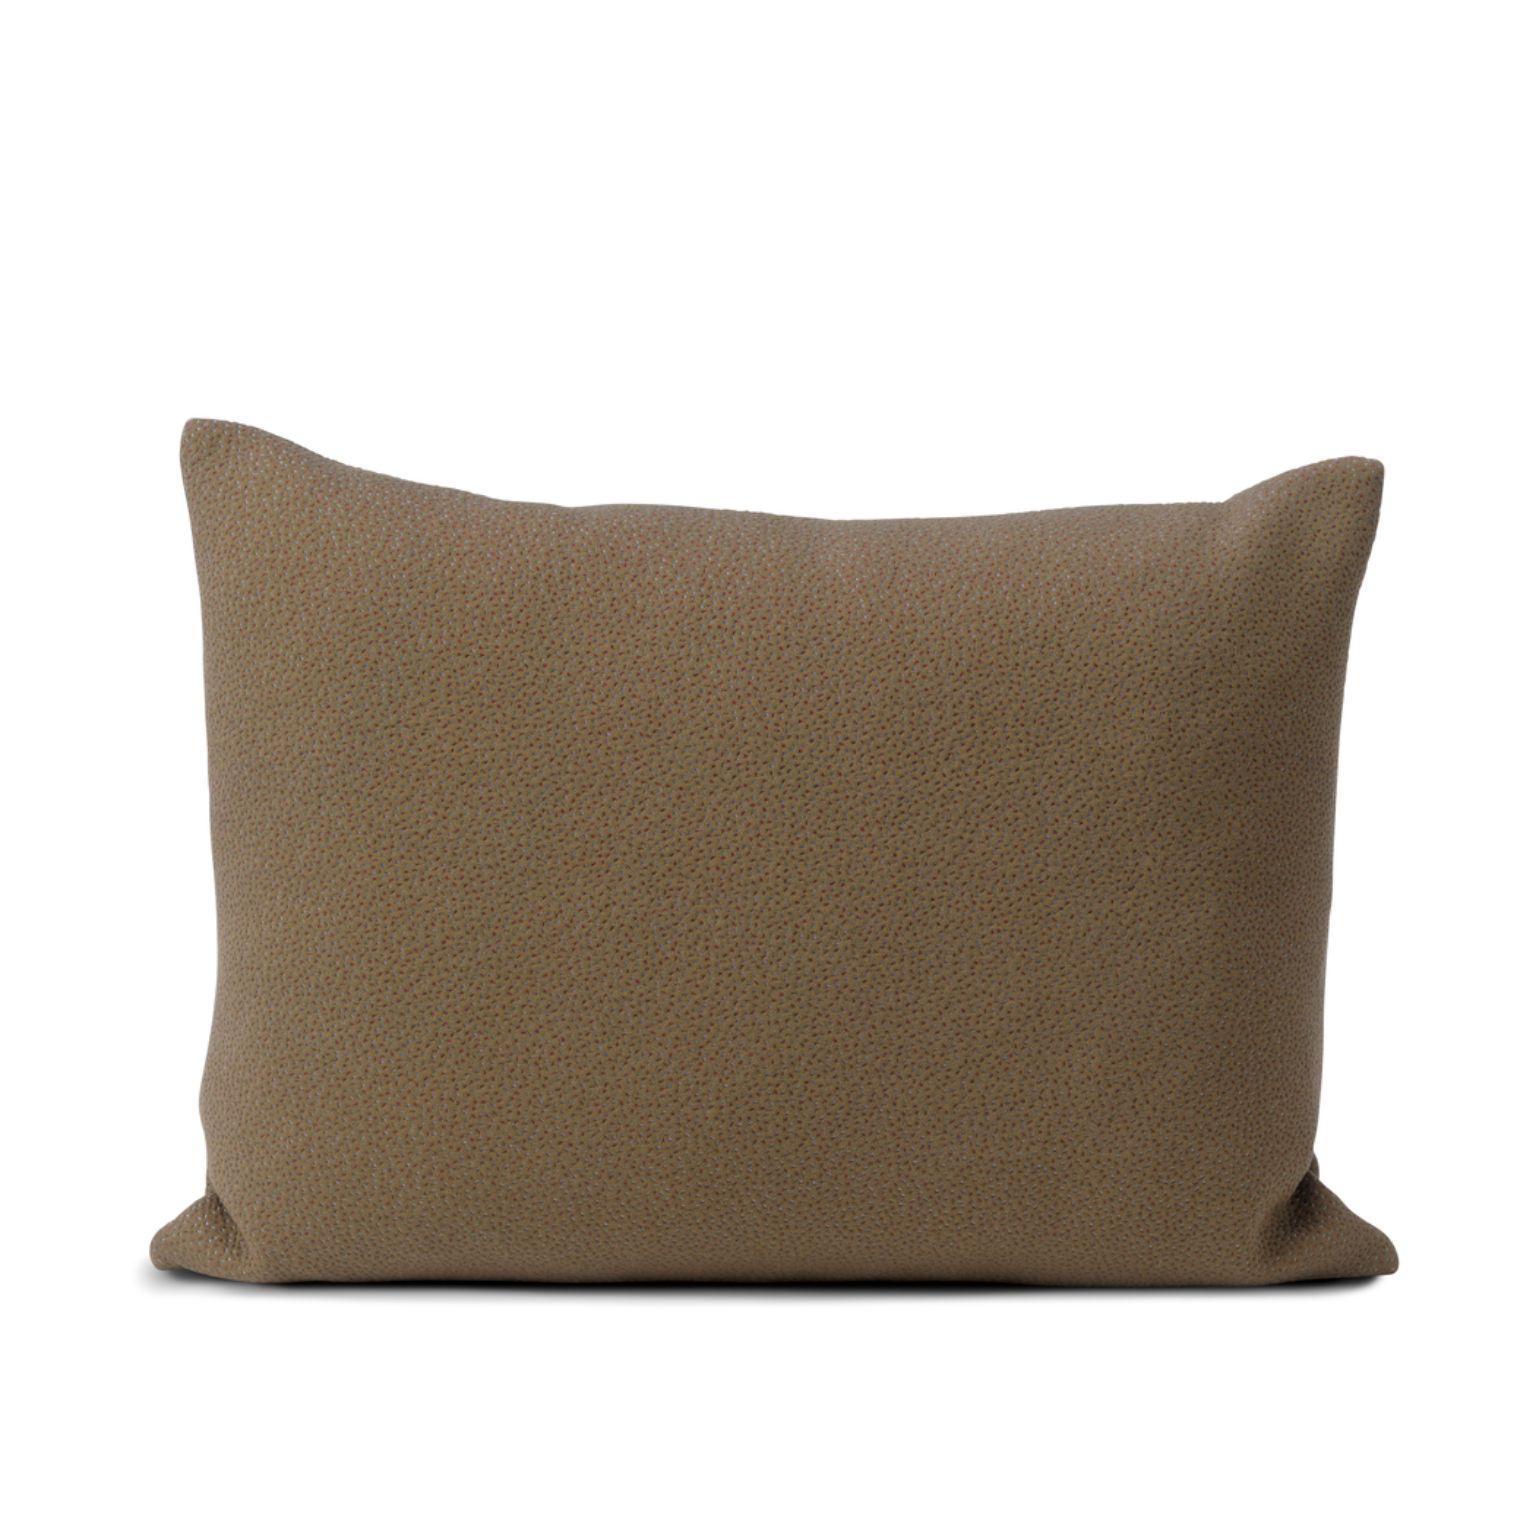 Galore cushion square sprinkles cappuccino brown by Warm Nordic
Dimensions: W 70 x D 15 x H 50 cm
Material: Textile upholstery, Granulate and feathers filling.
Weight: 1.4 kg
Also available in different colours and finishes. 

An elegant